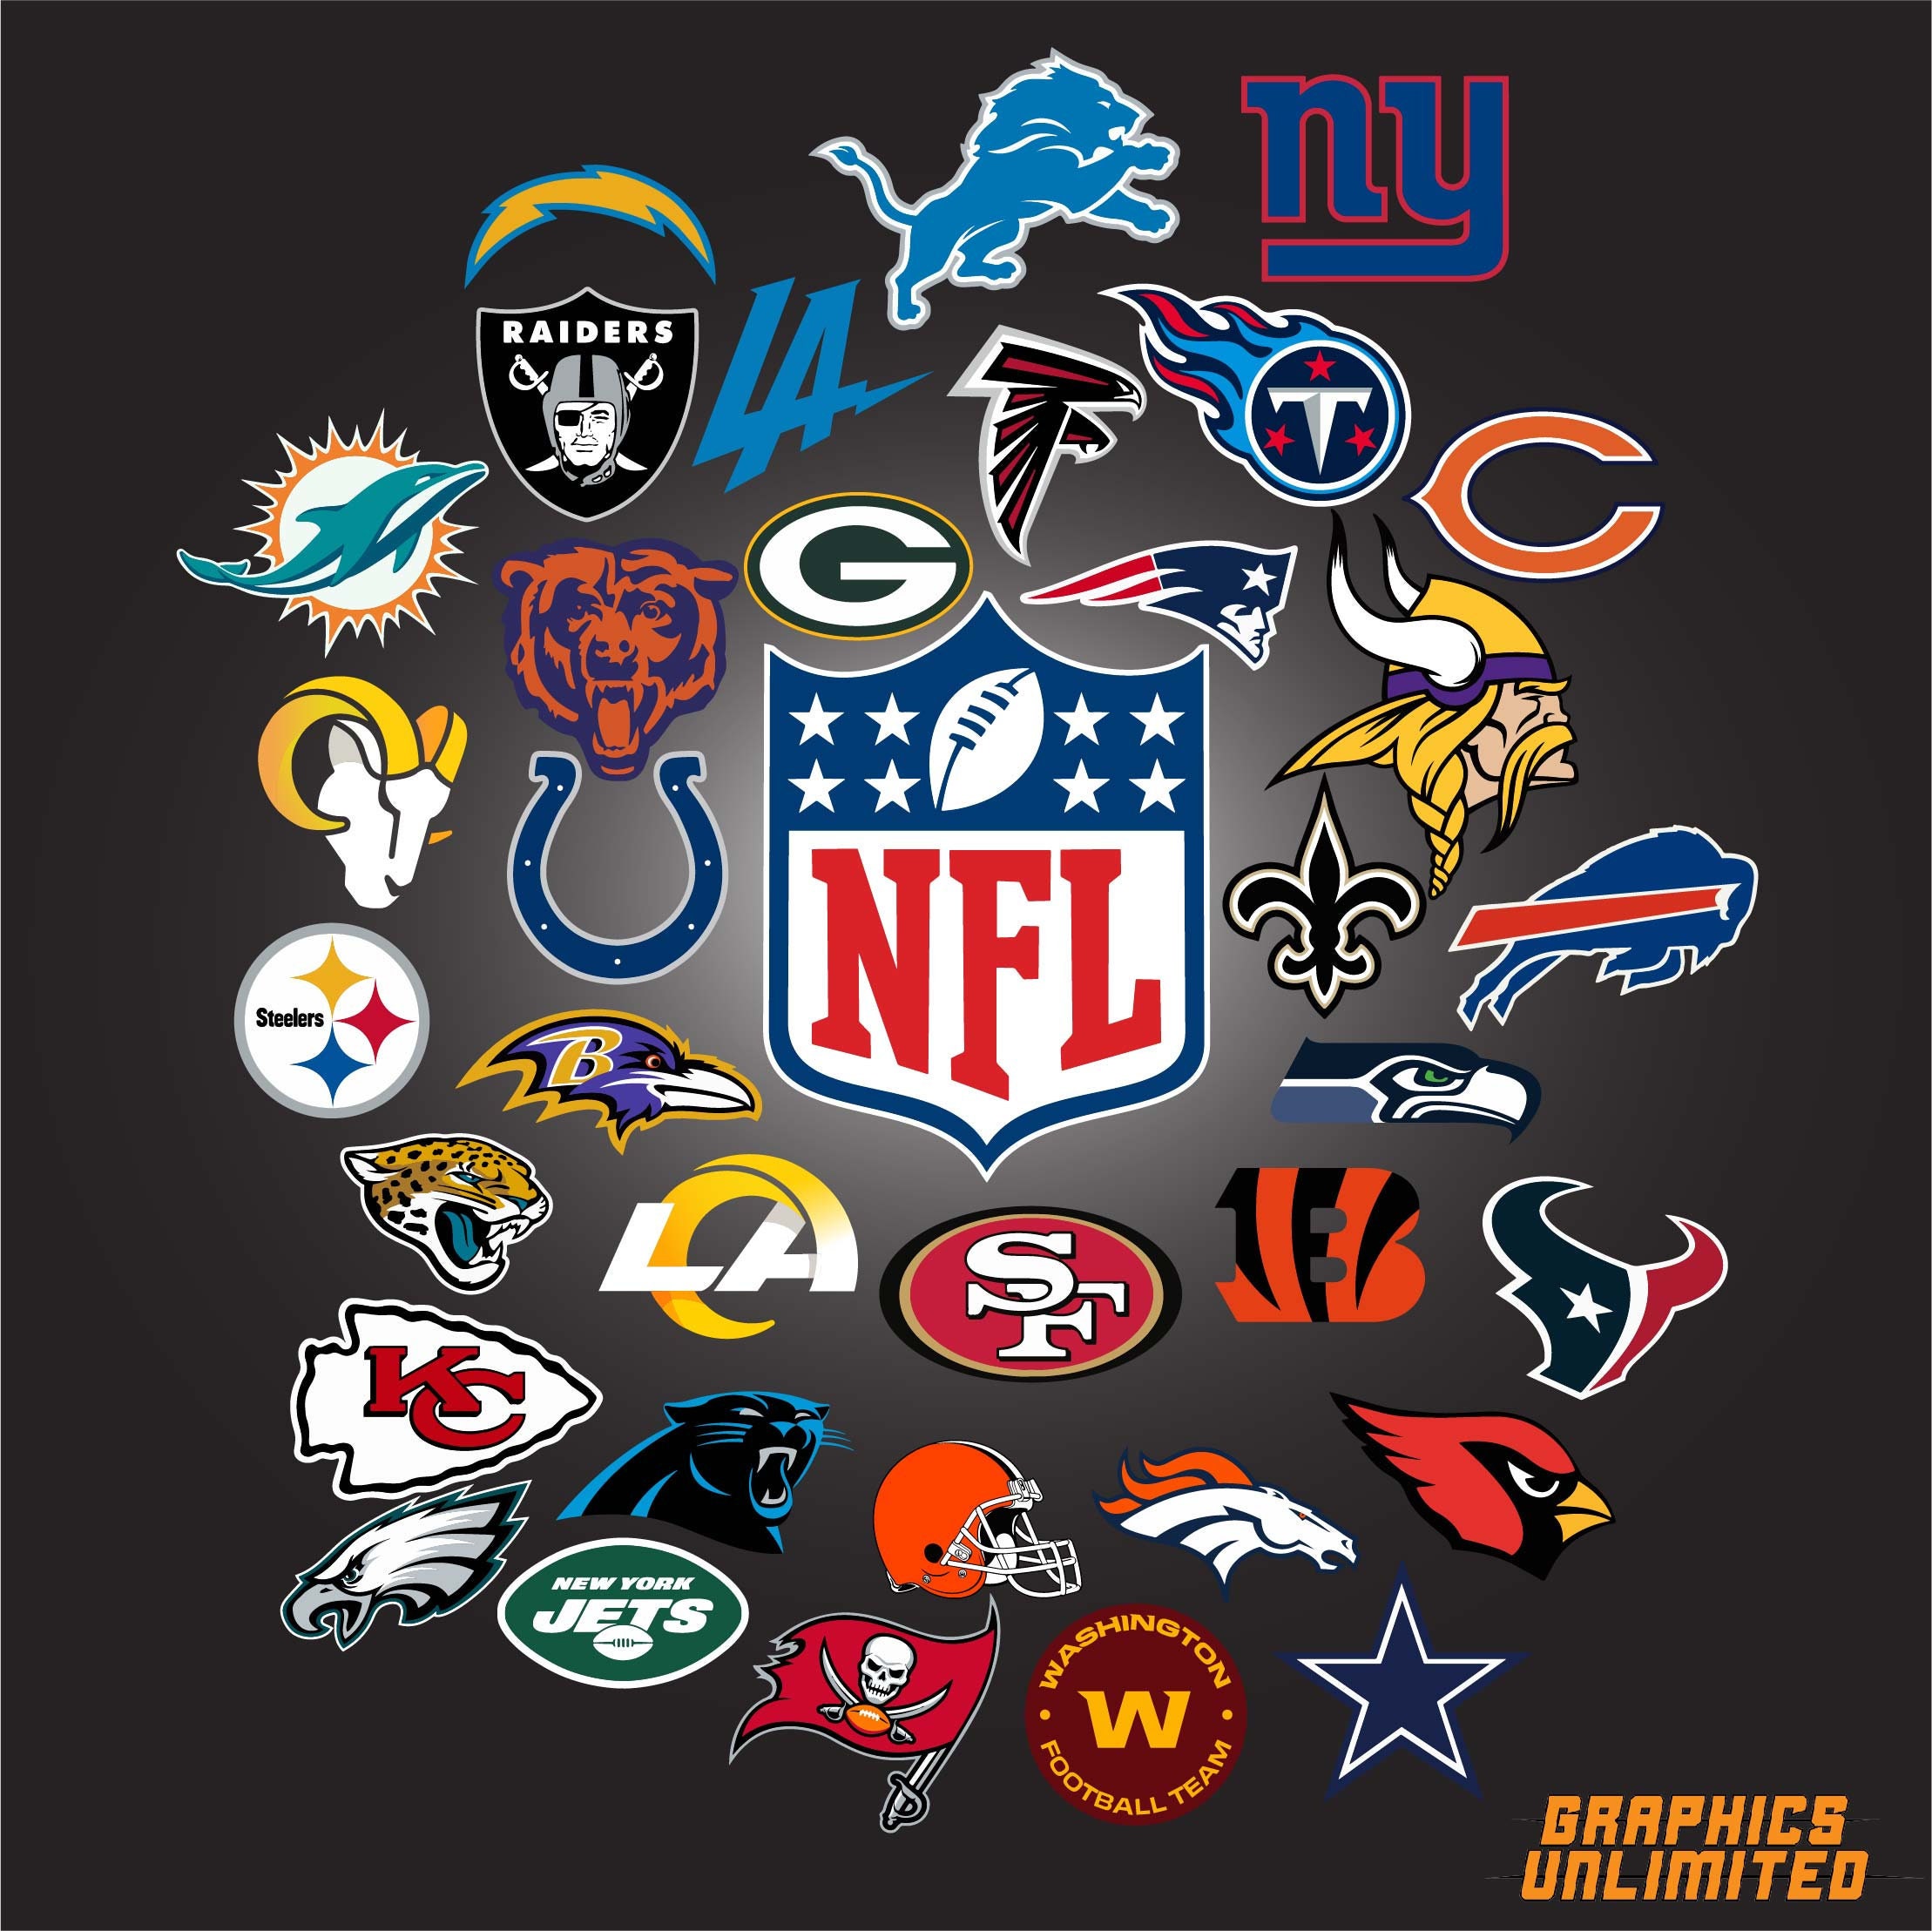 All 32 NFL SVG Teams Logos Up To Date Scalable ai file and | Etsy